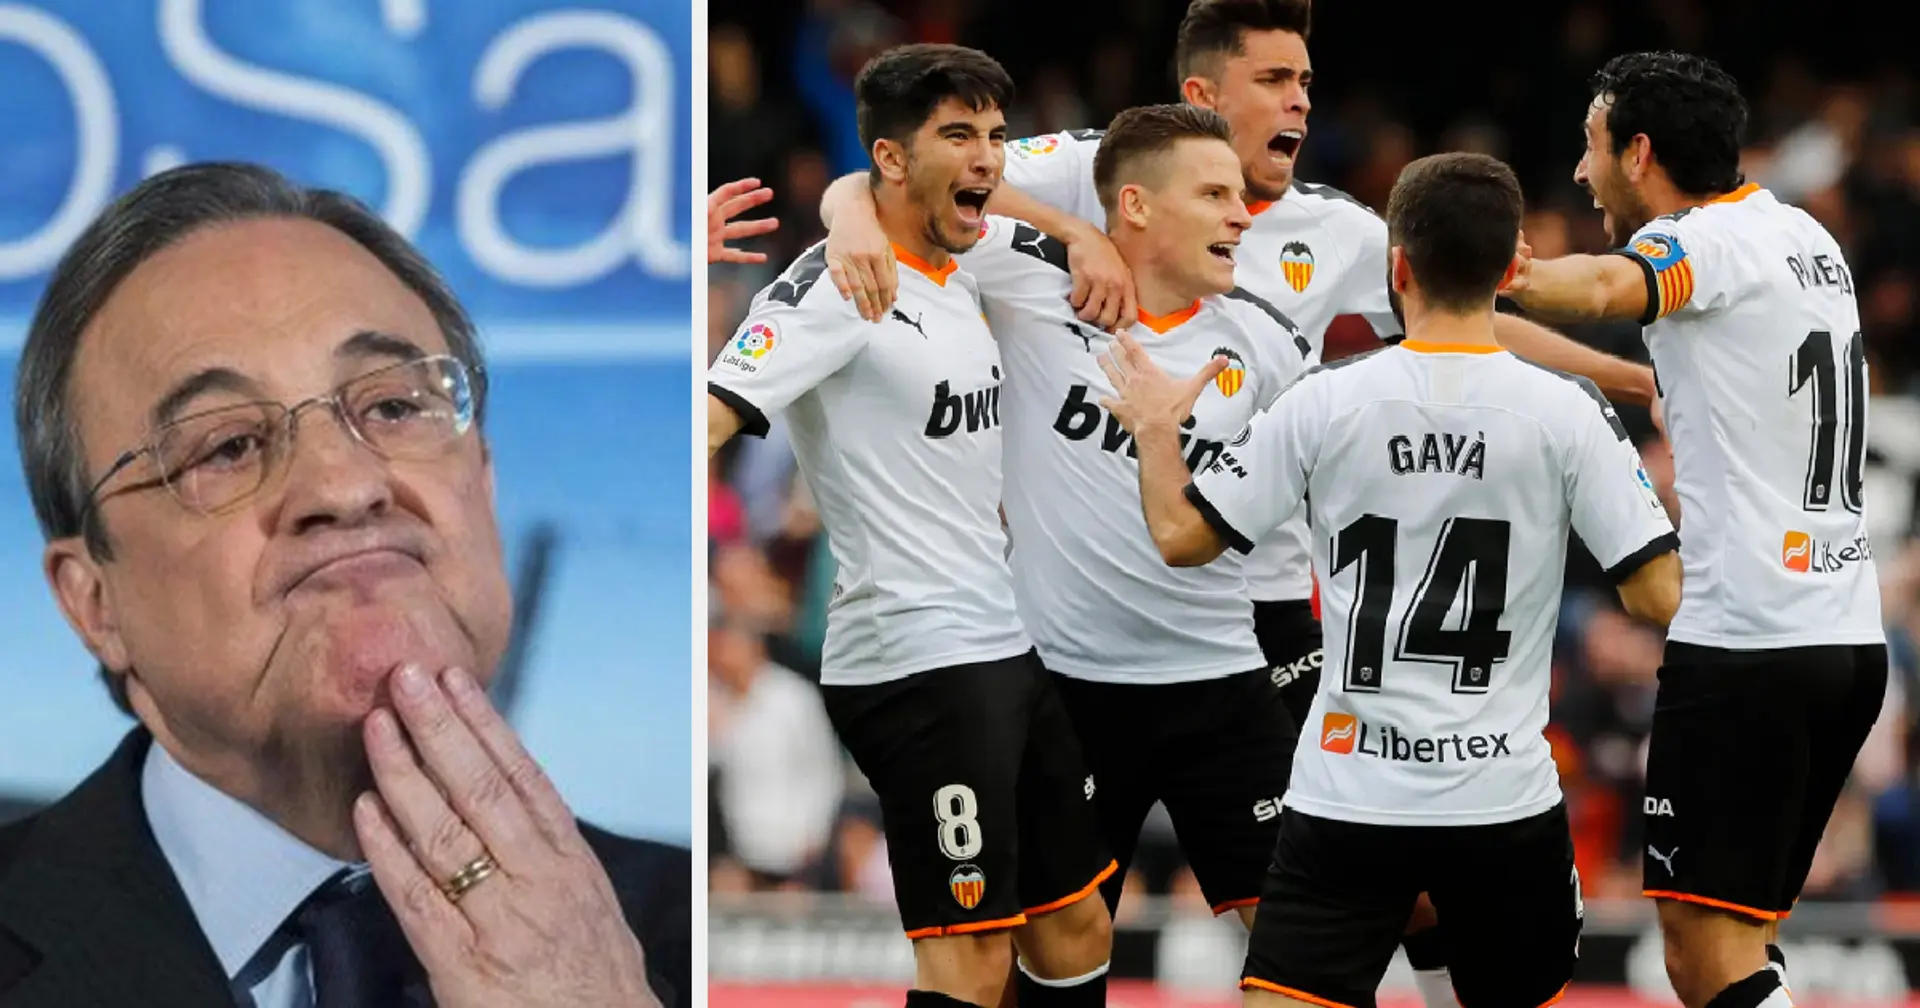 Valencia offer two players to Real Madrid — Barca want them (reliability: 4 stars)